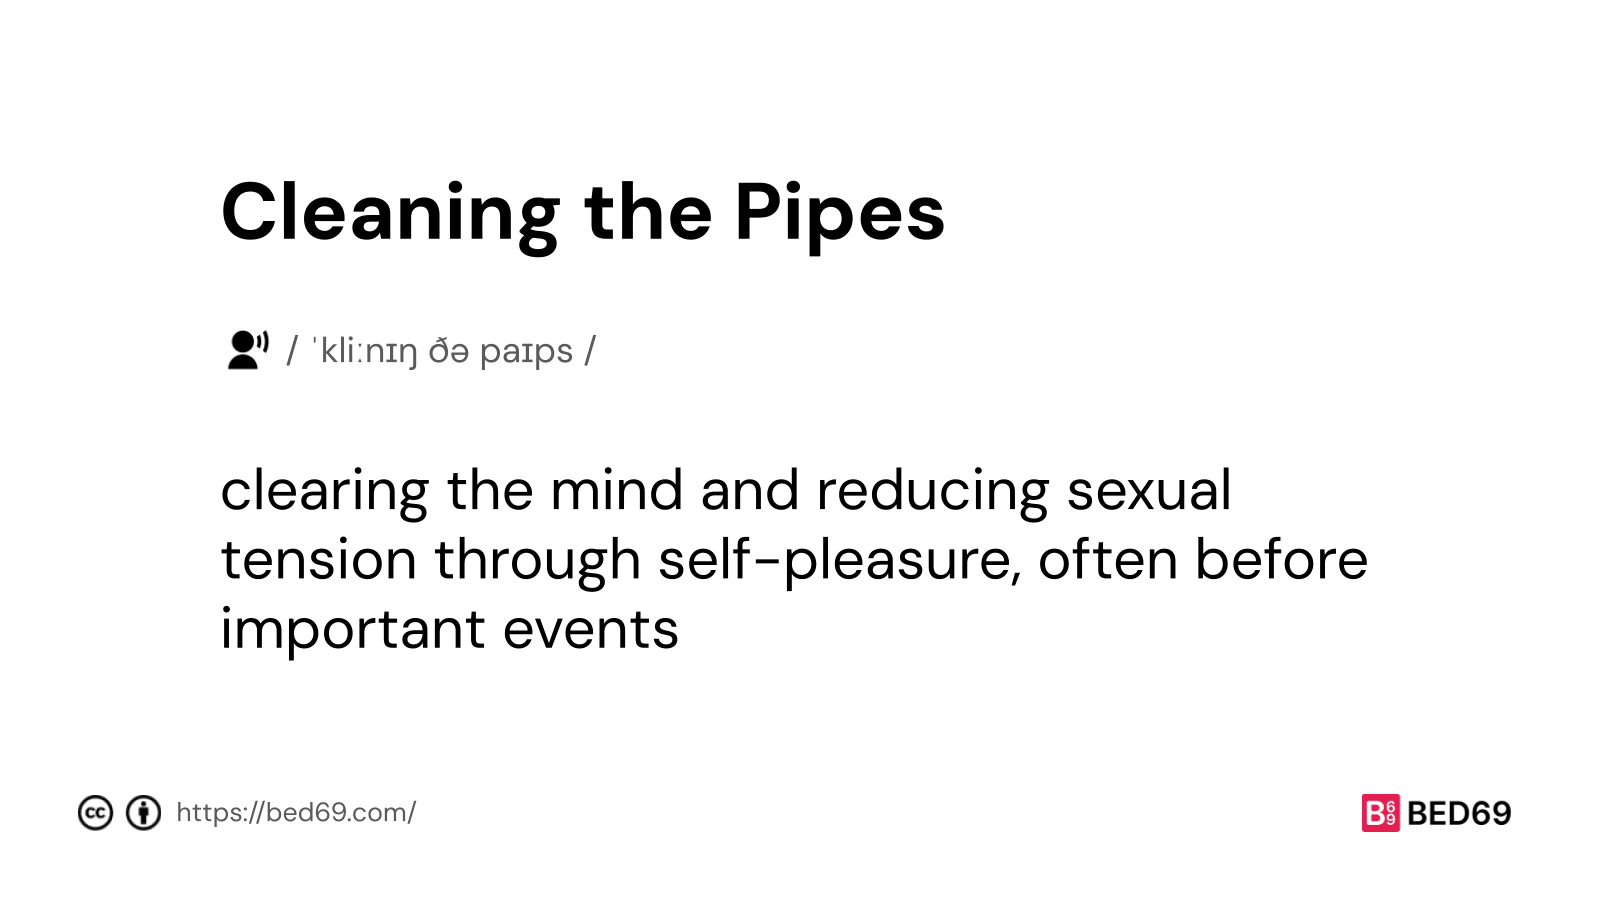 Cleaning the Pipes - Word Definition